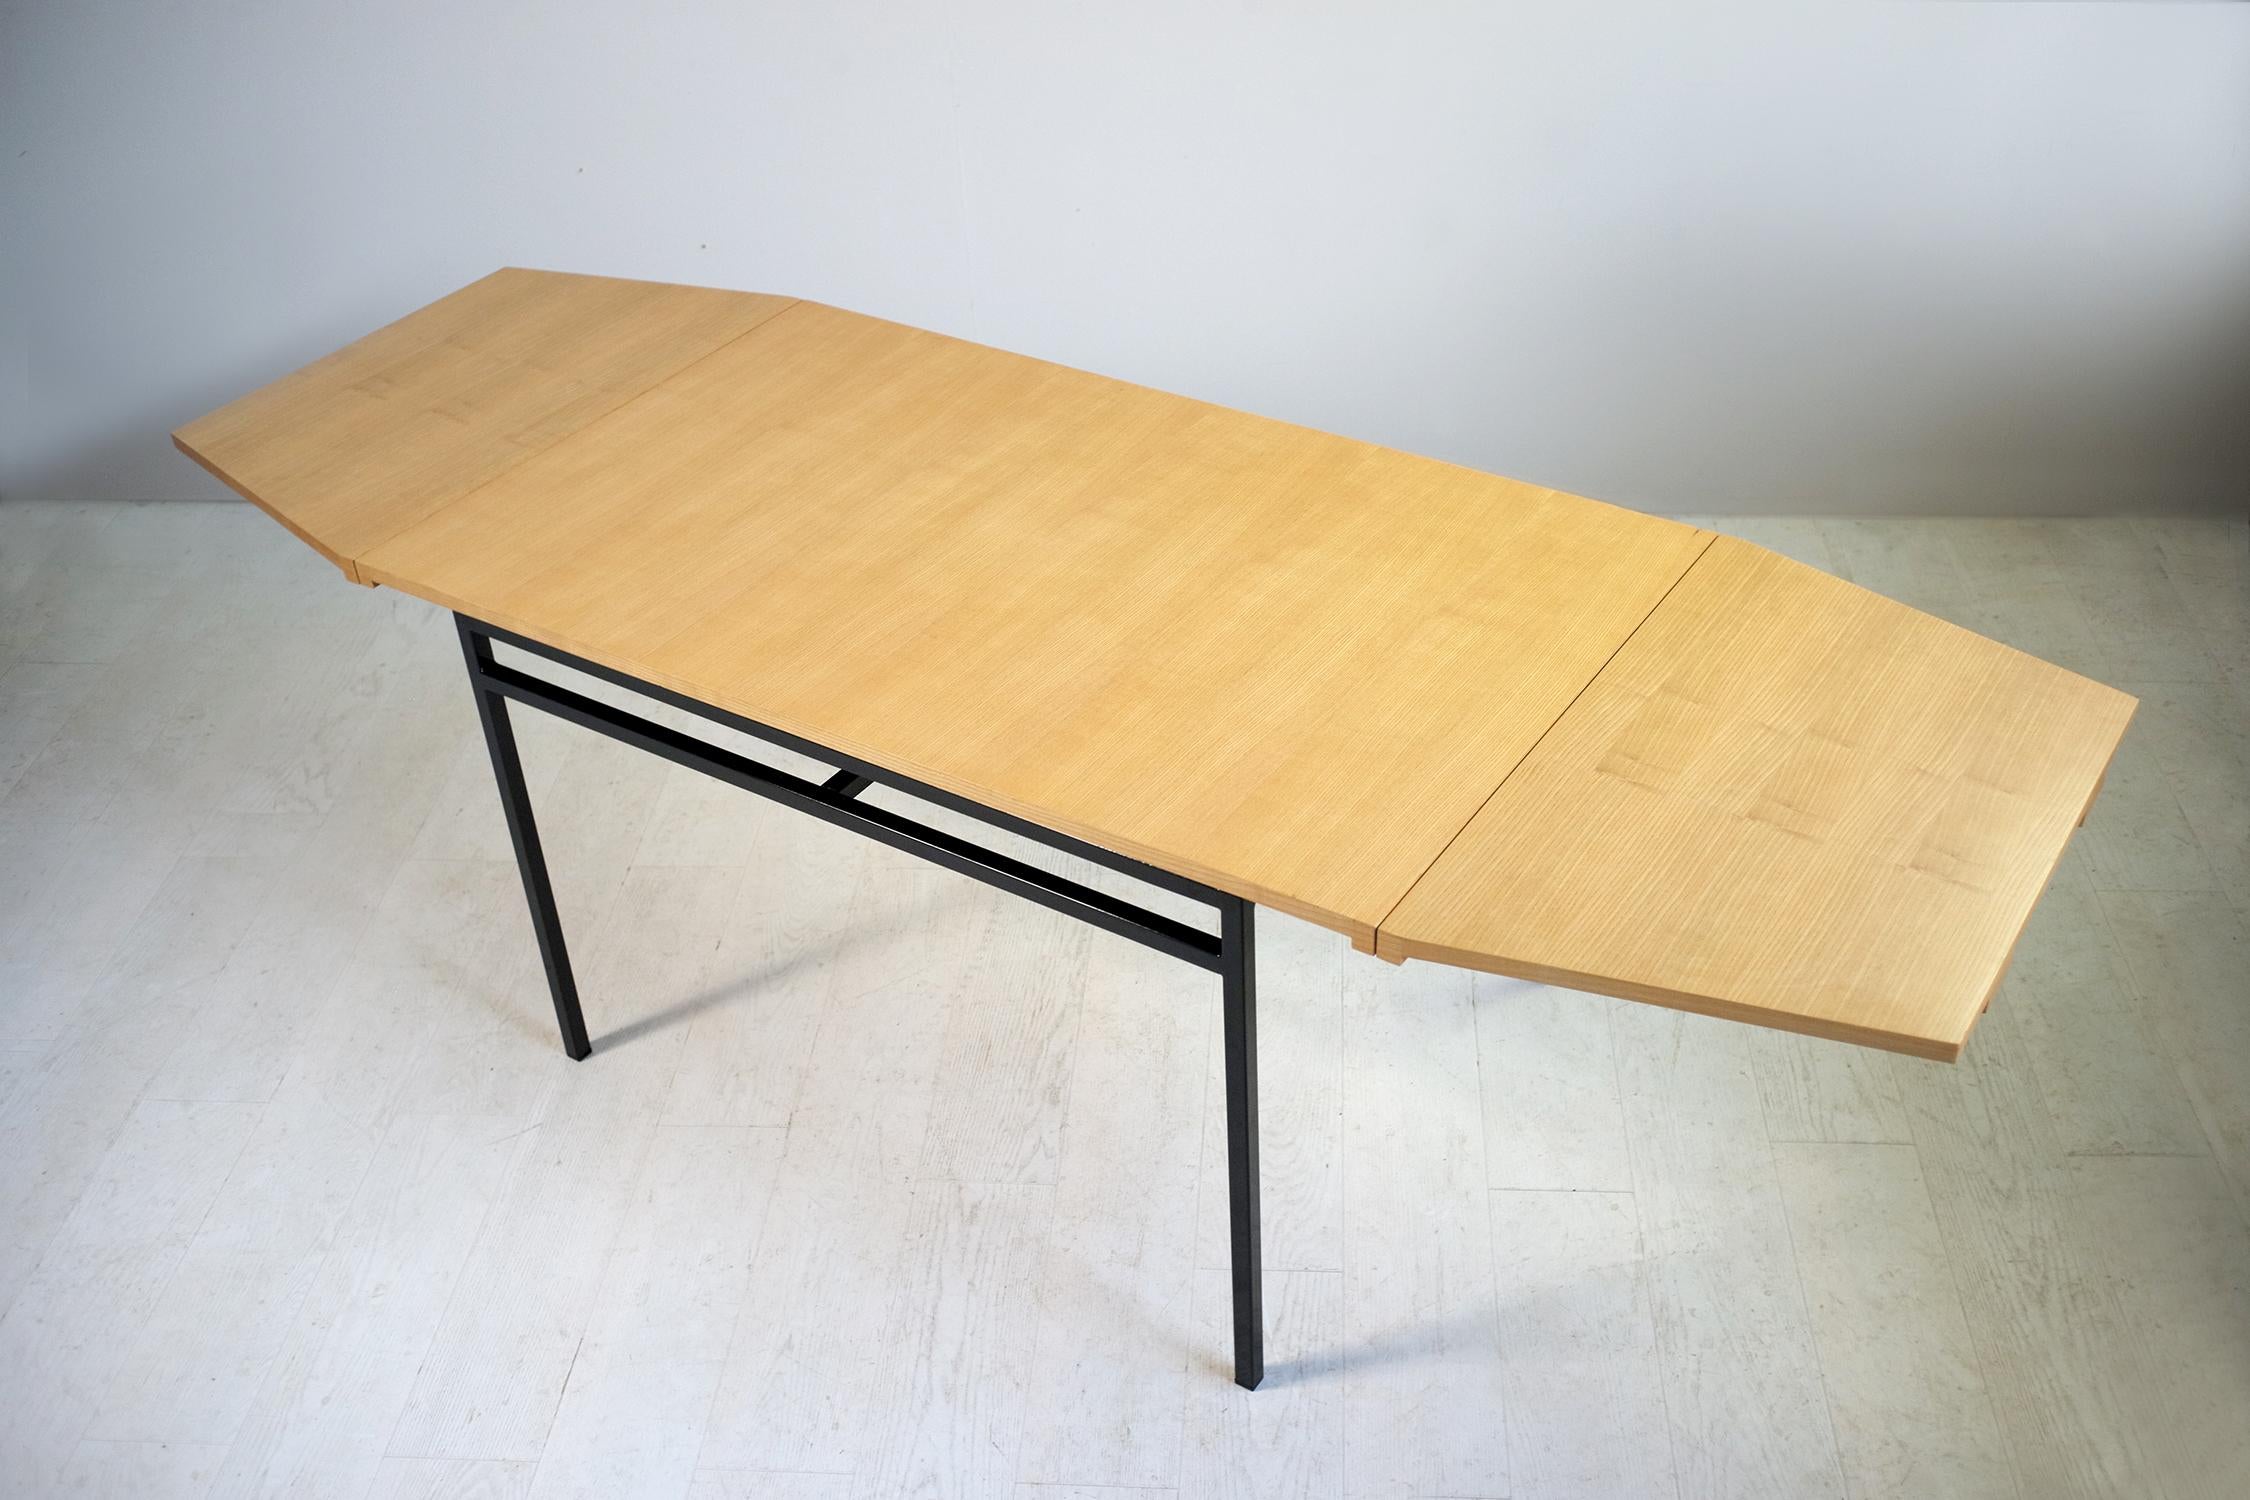 Pierre Guariche and the Atelier de Recherches Plastiques for the Huchers Minvielle, France, 1955; Dining table with rectangular top in golden ash, with two trapezoidal extensions, black lacquered quadrangular metal base. Dimensions of the top 140/85